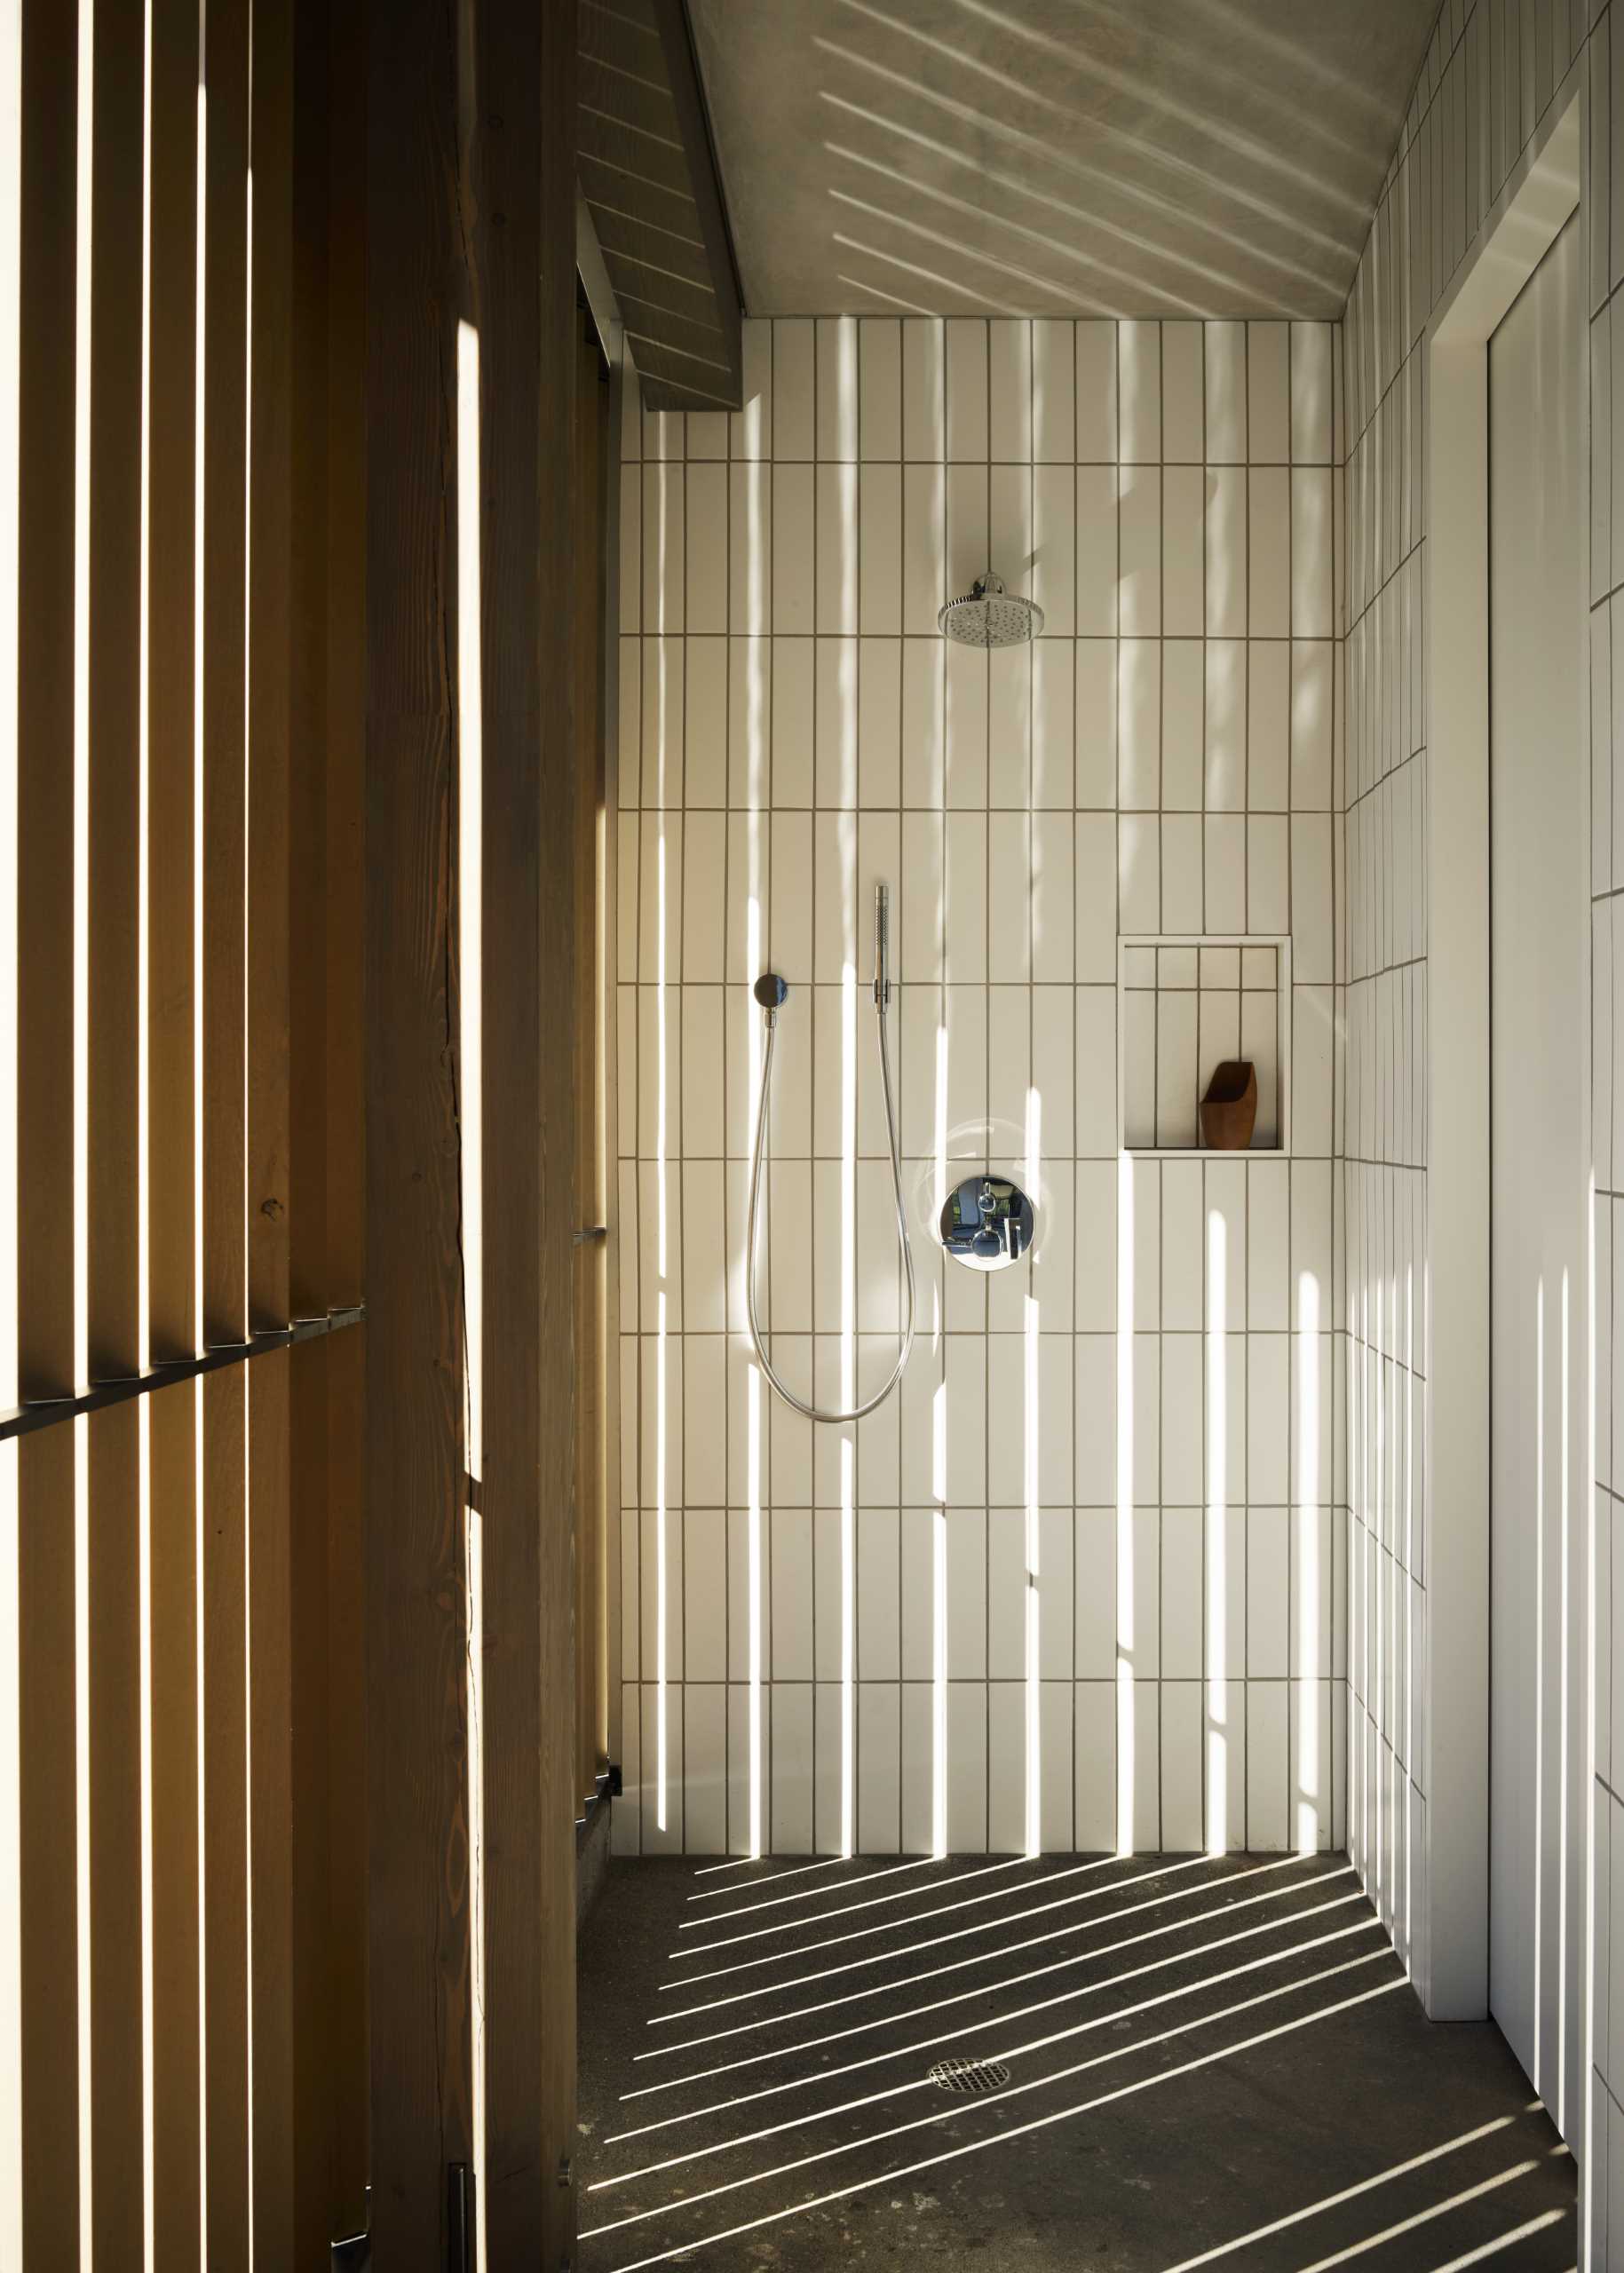 This bathroom has walls covered in vertical tiles which contrast the wood details.